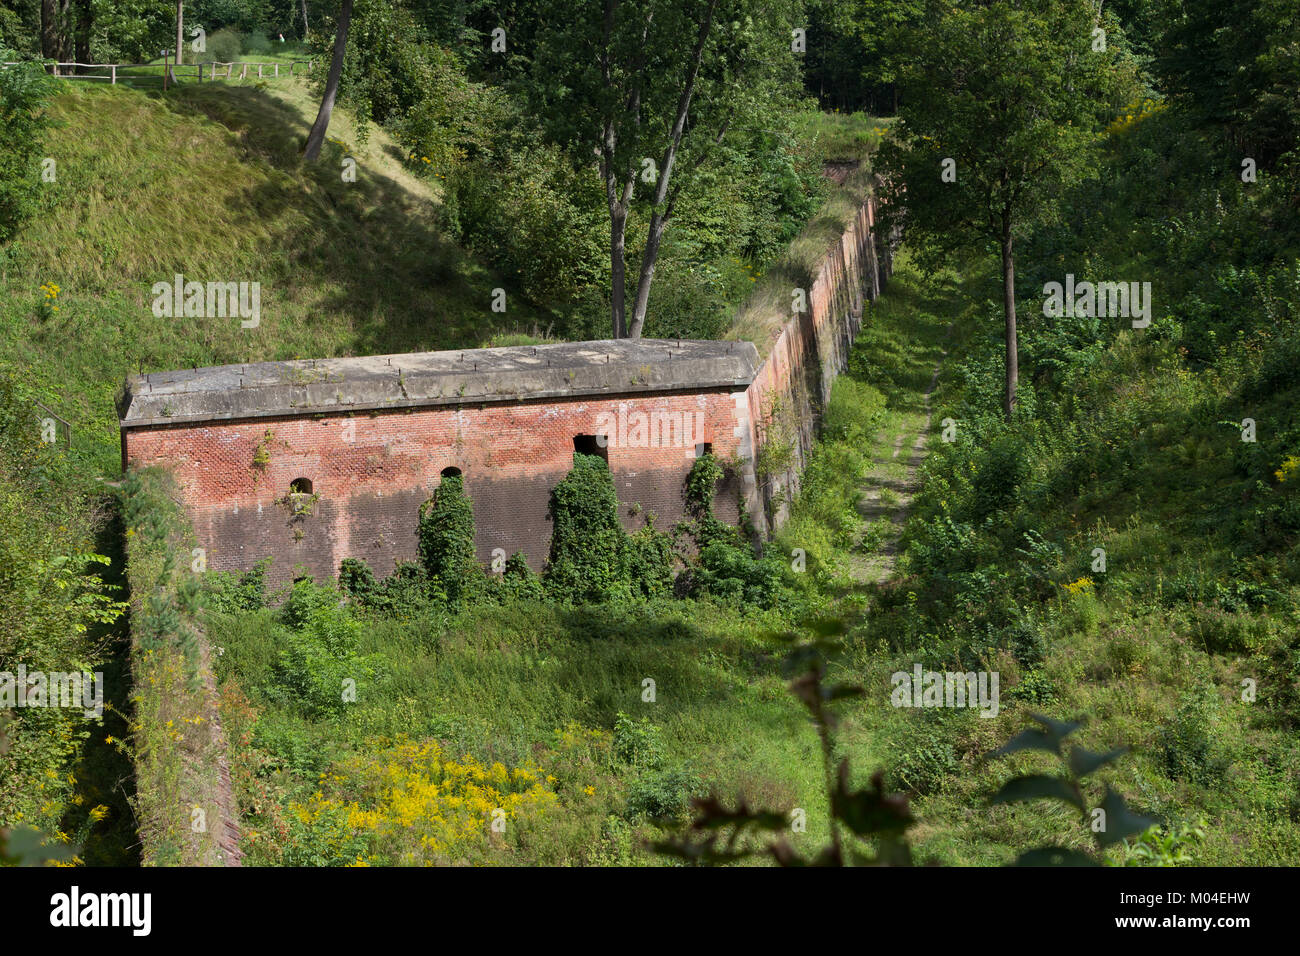 Boyen Fortress is a former Prussian fortress located in the western part of Gizycko, in Warmian-Masurian Voivodeship, northeastern Poland. Stock Photo